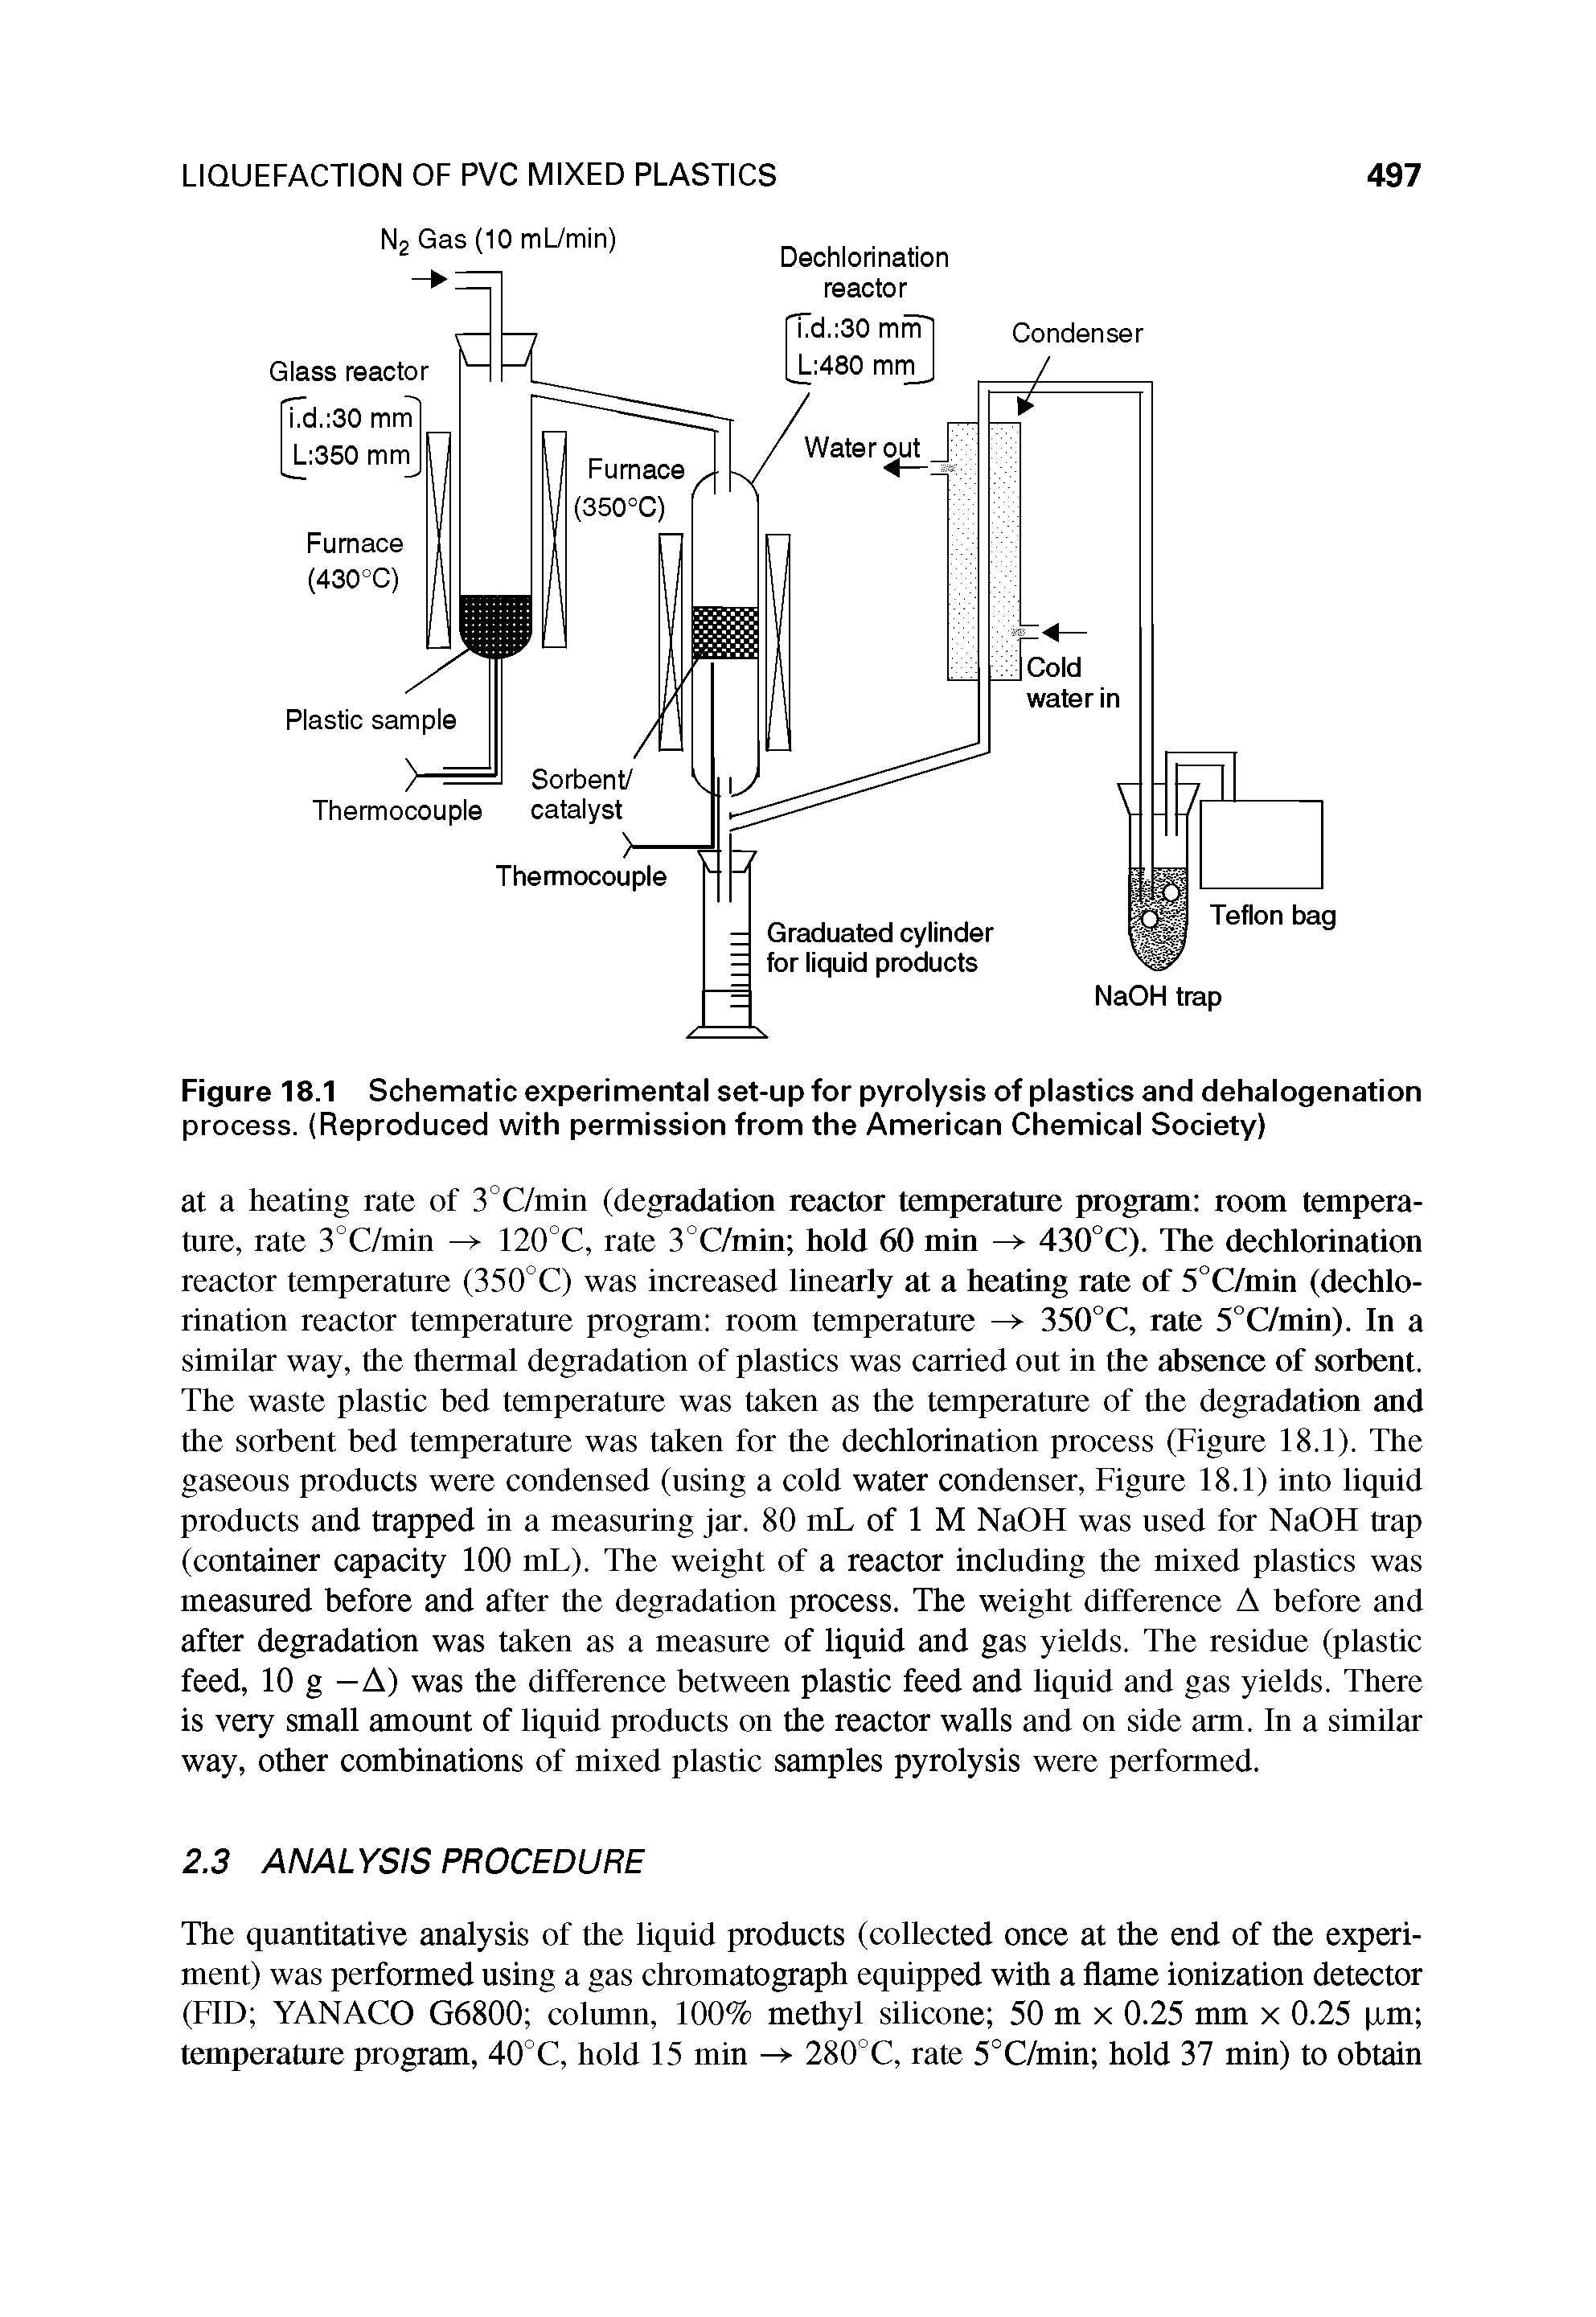 Figure 18.1 Schematic experimental set-up for pyrolysis of plastics and dehalogenation process. (Reproduced with permission from the American Chemical Society)...